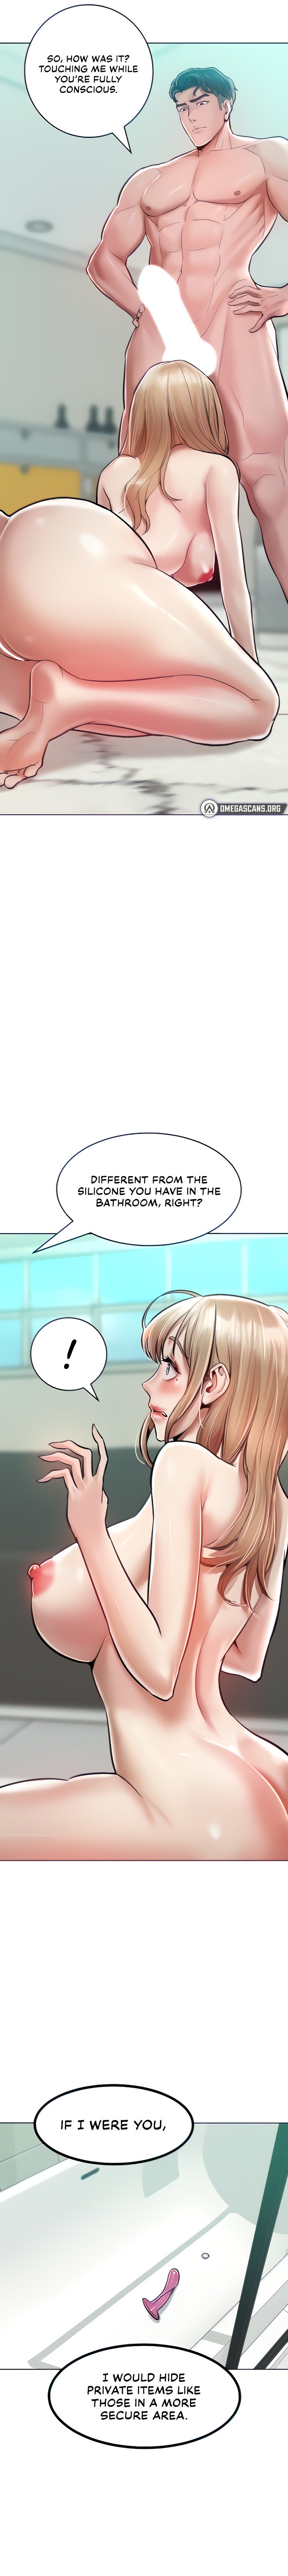 Forcing the Woman I Despise Into Submission - Chapter 14 Page 4